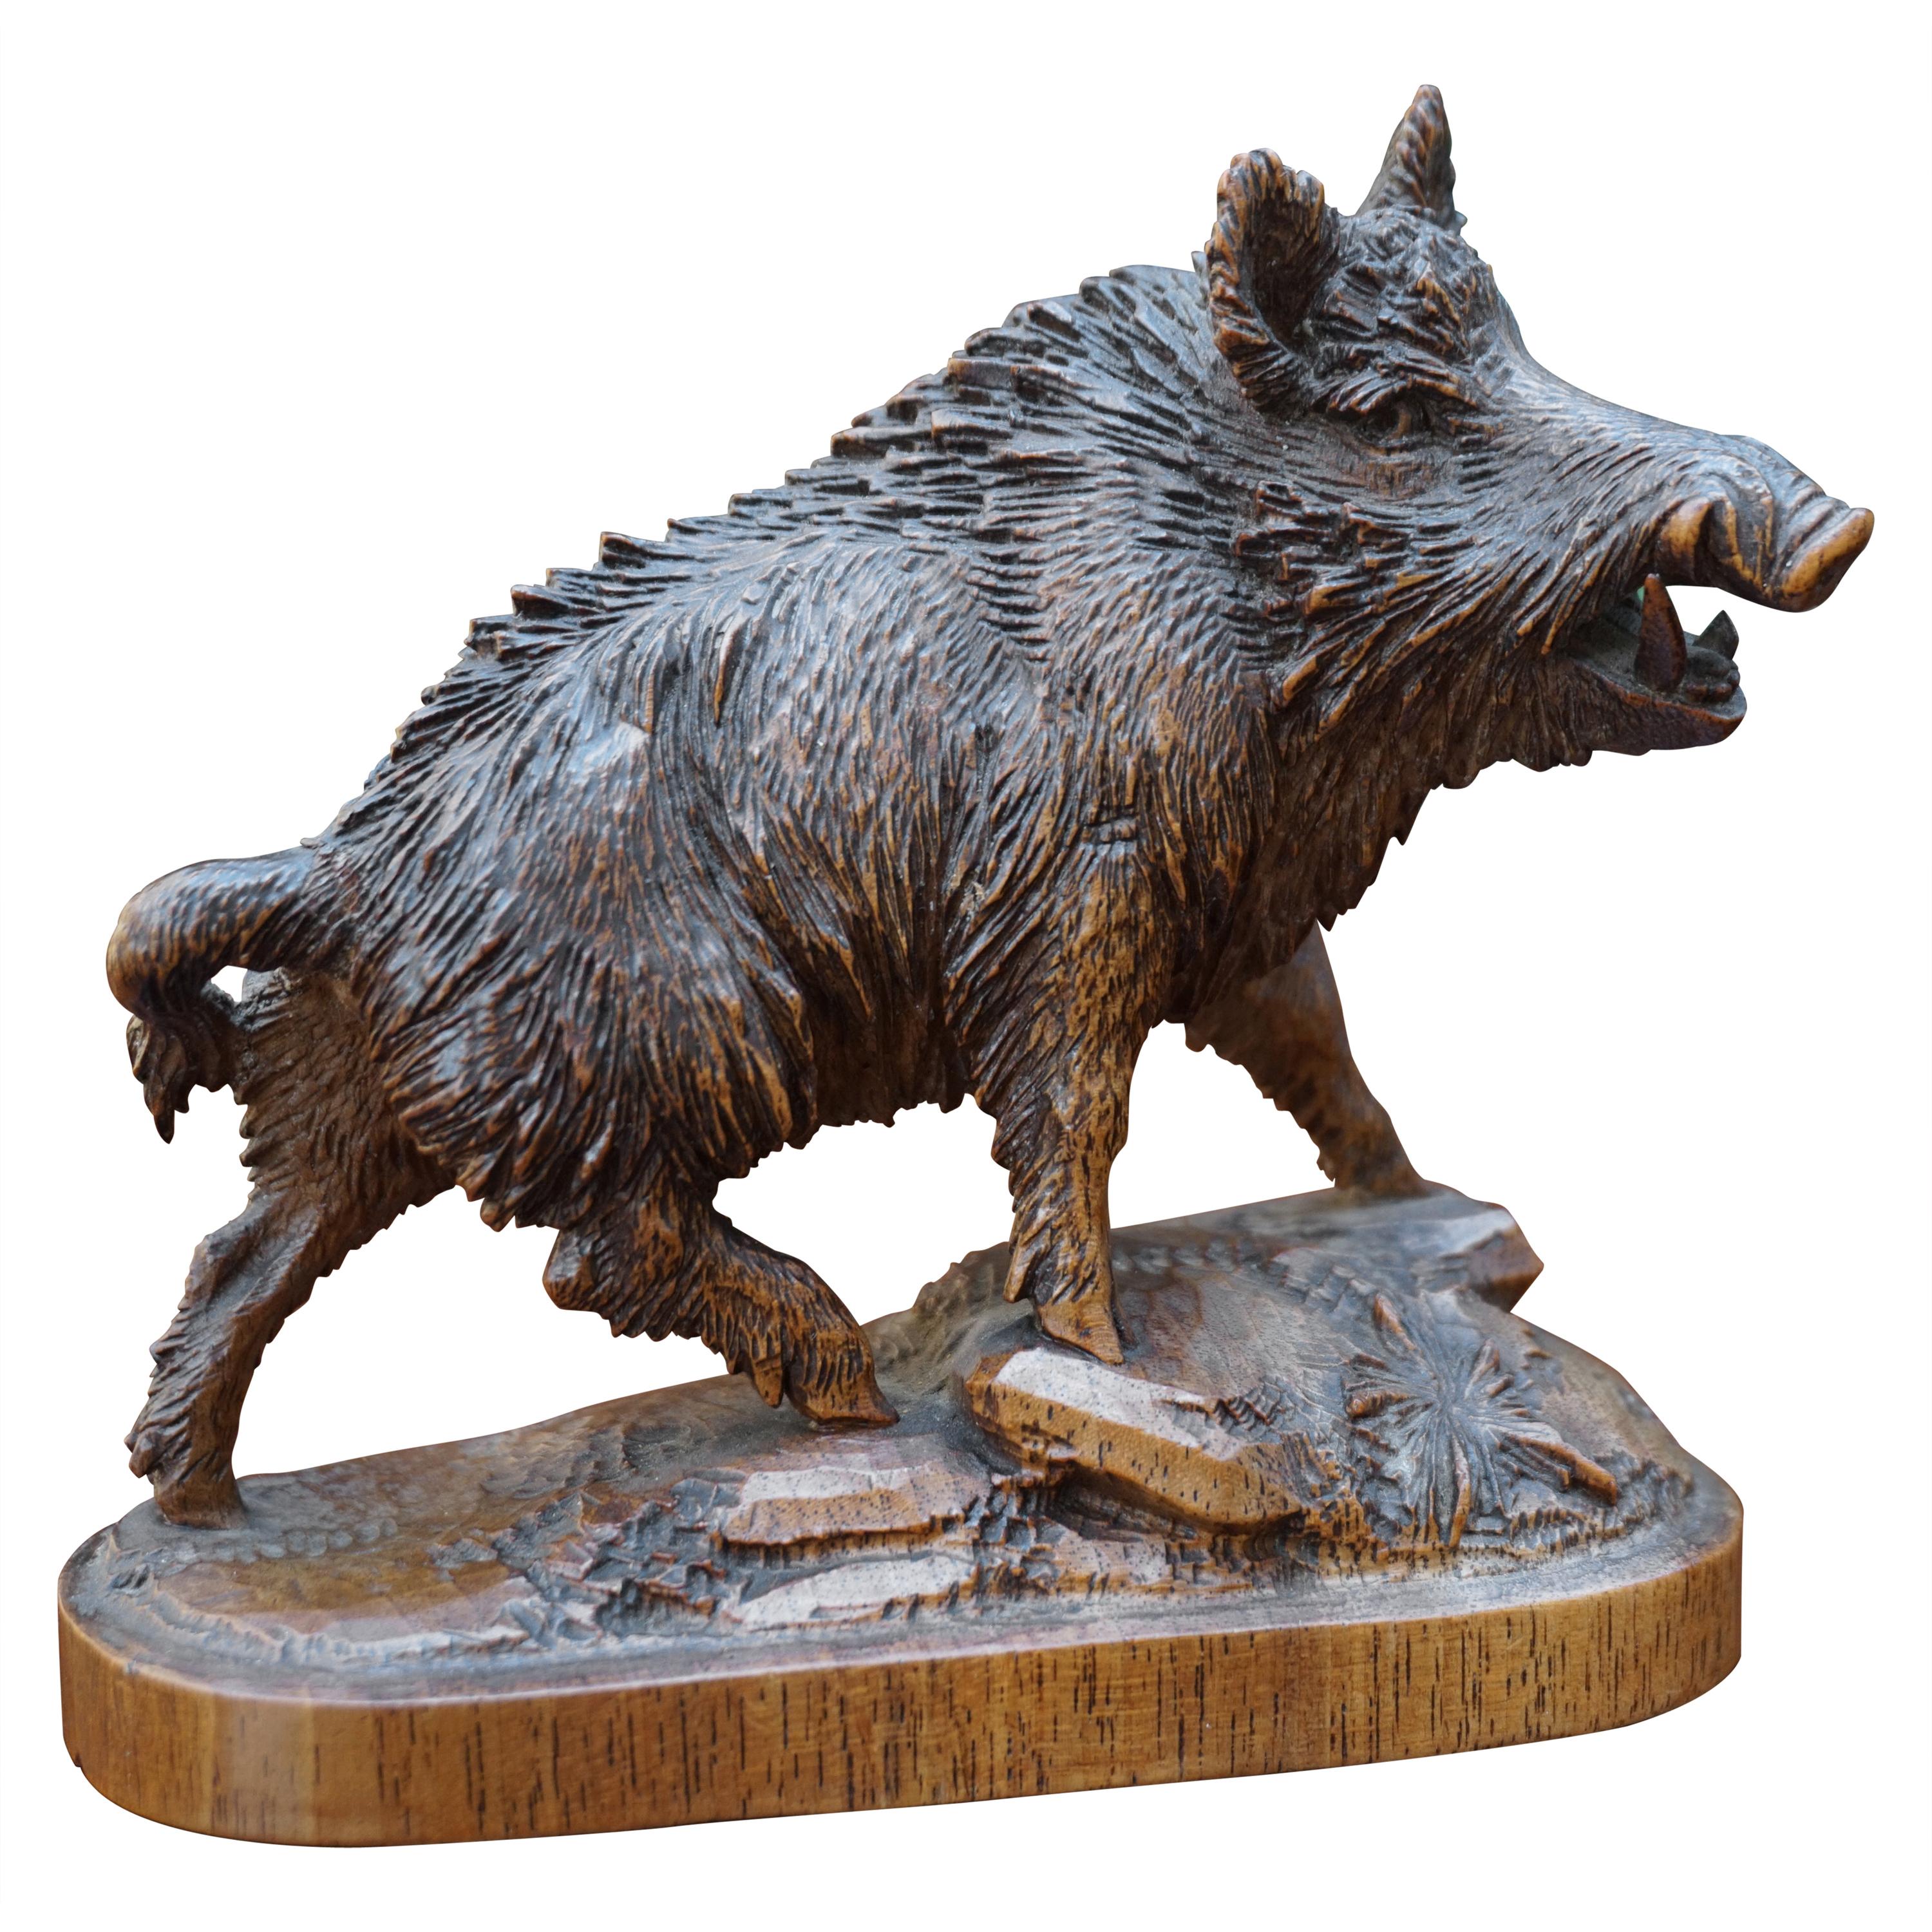 Finest Quality, Antique Hand Carved Nutwood Swiss Black Forest Boar Sculpture